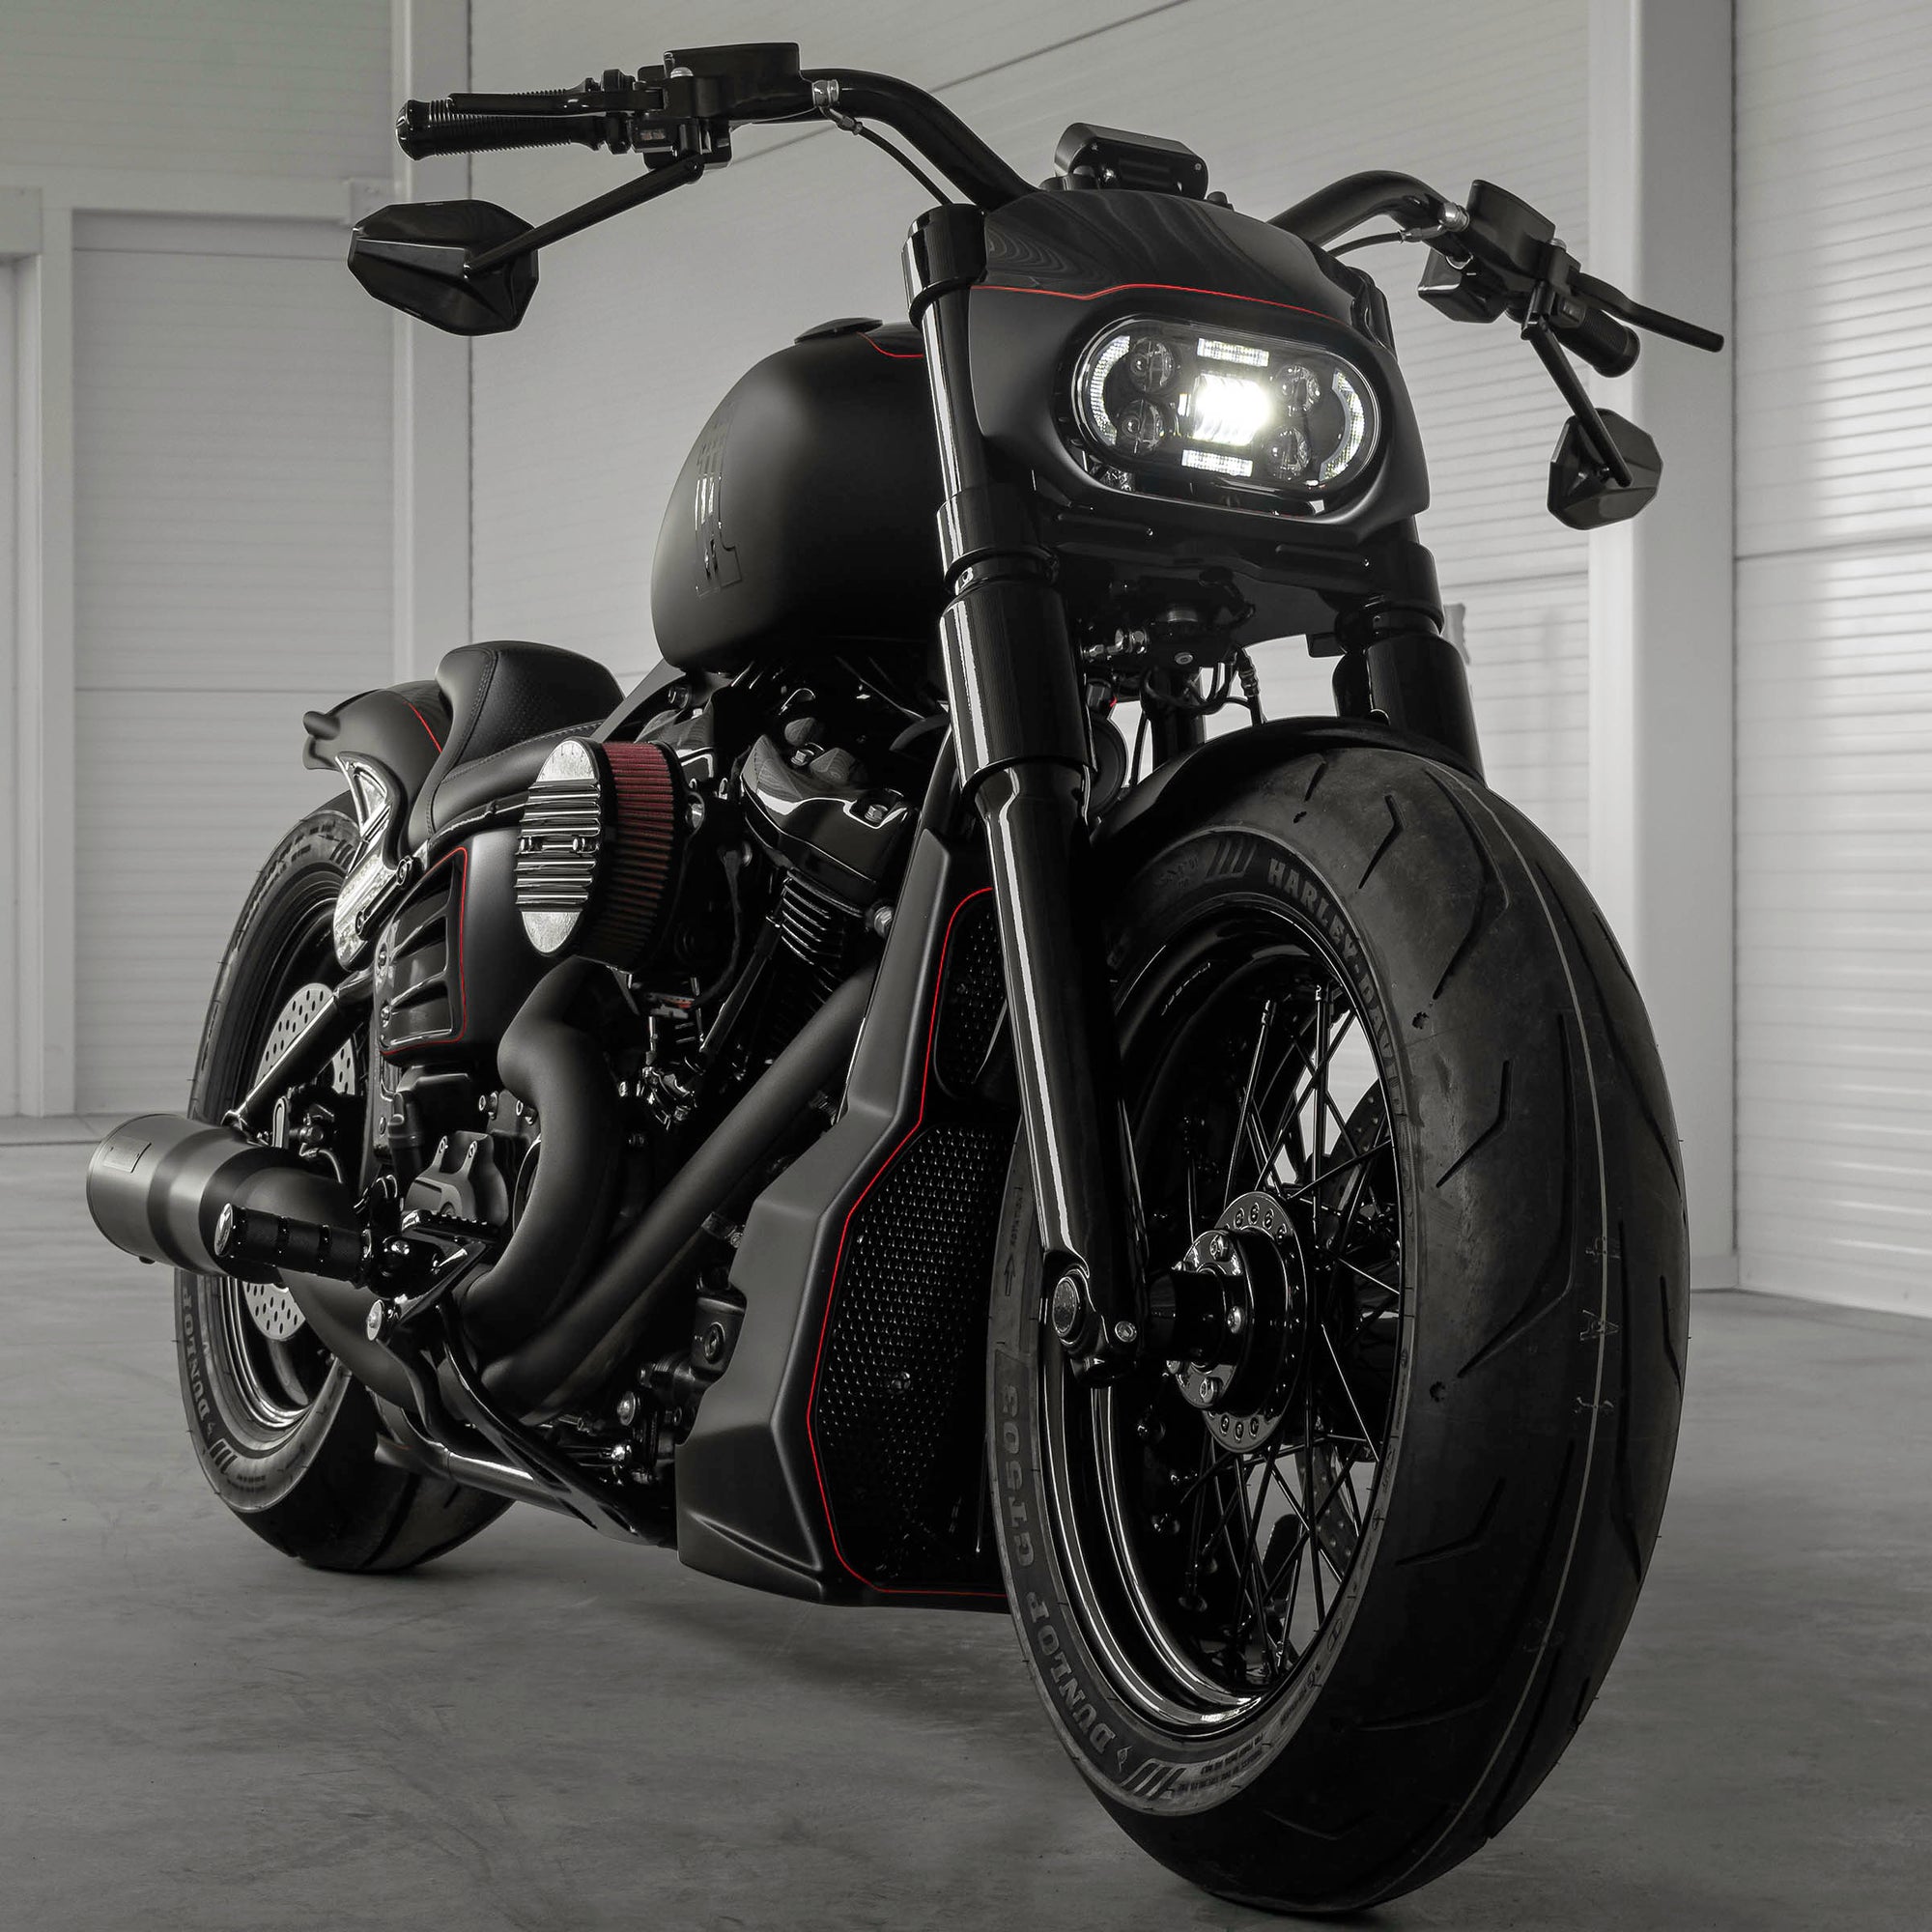 Harley Davidson motorcycle with Killer Custom parts from the front in a modern white garage